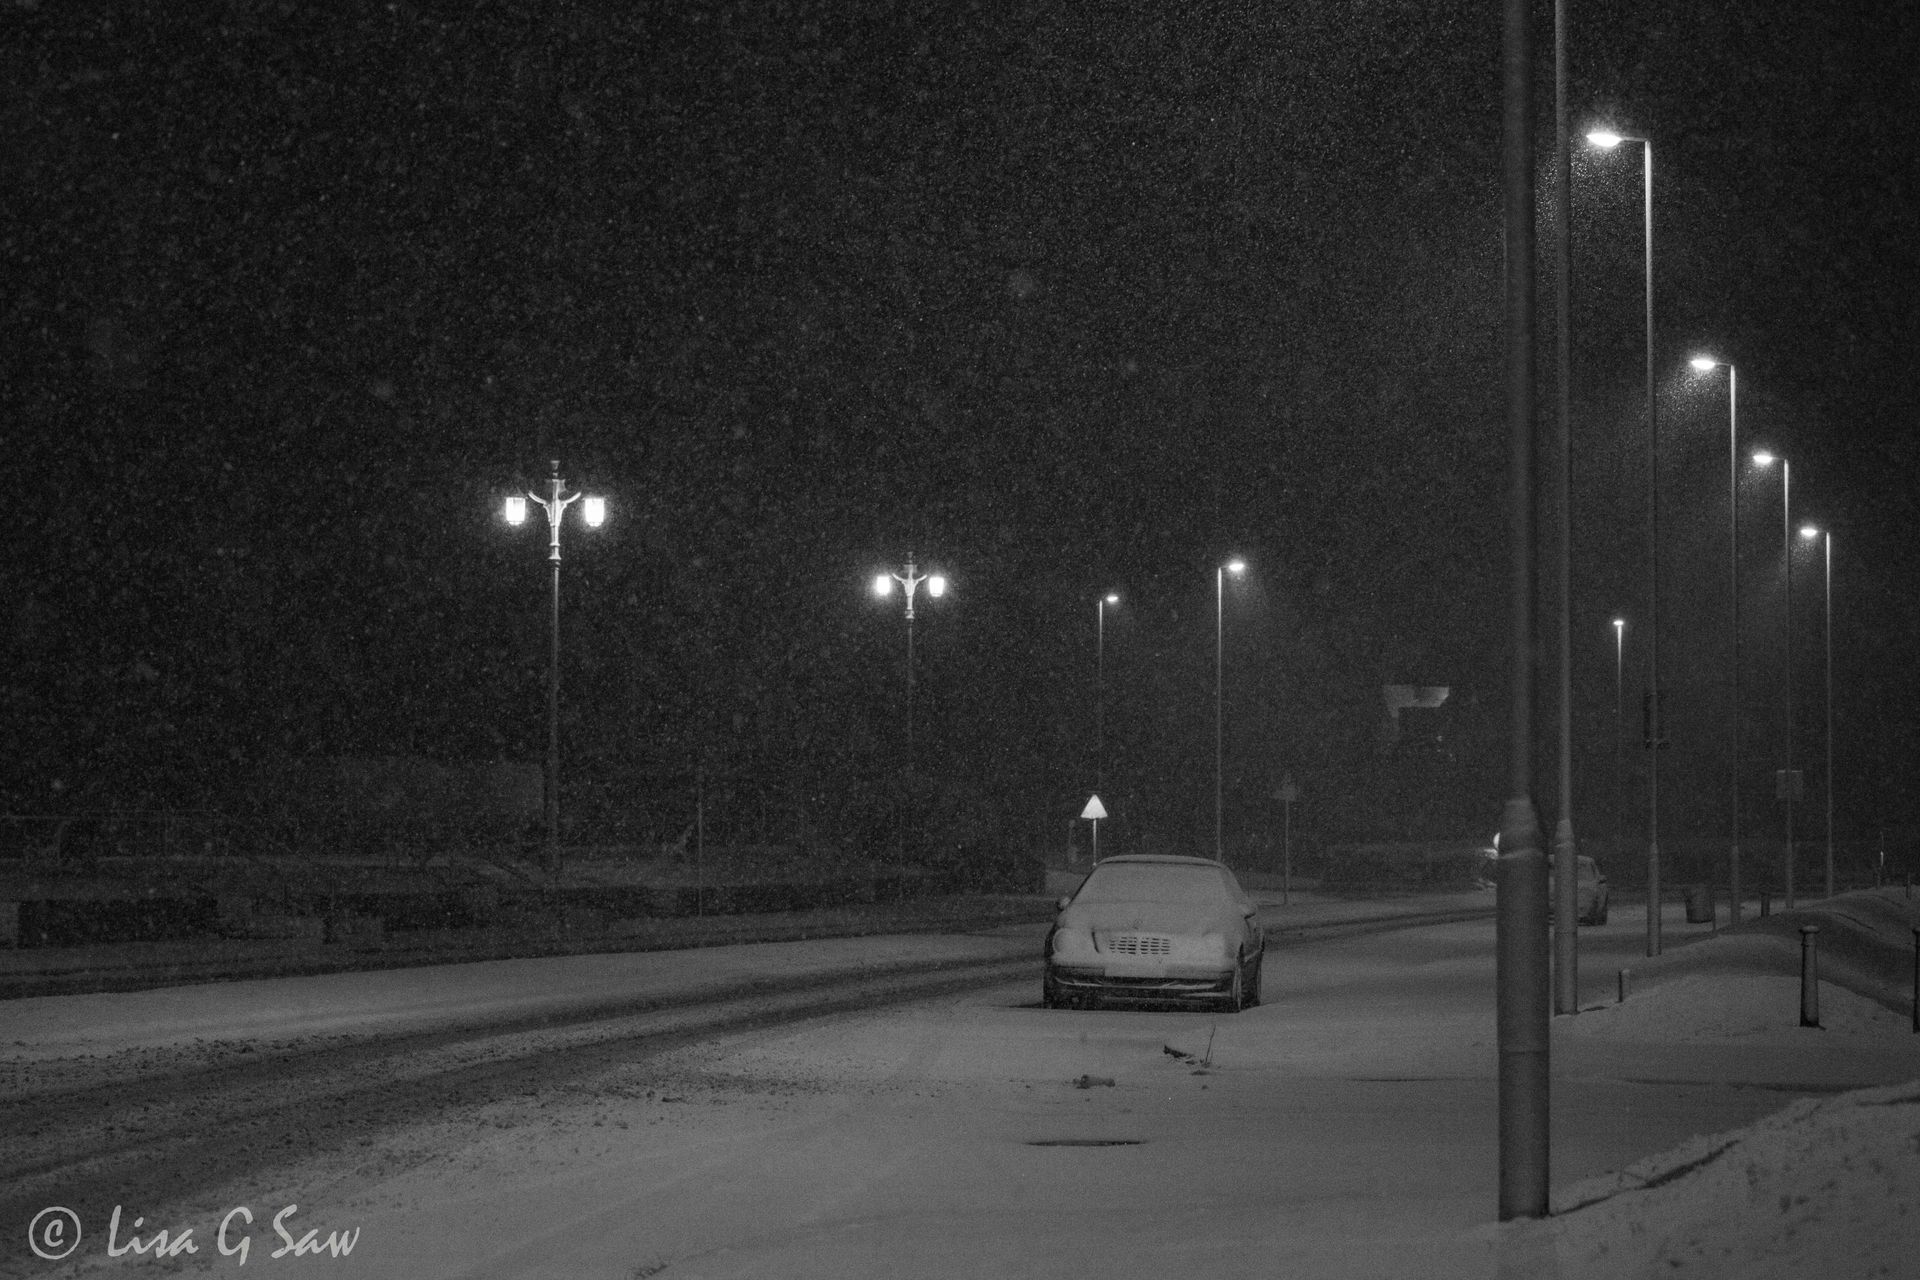 Car and street lights at night, snowing